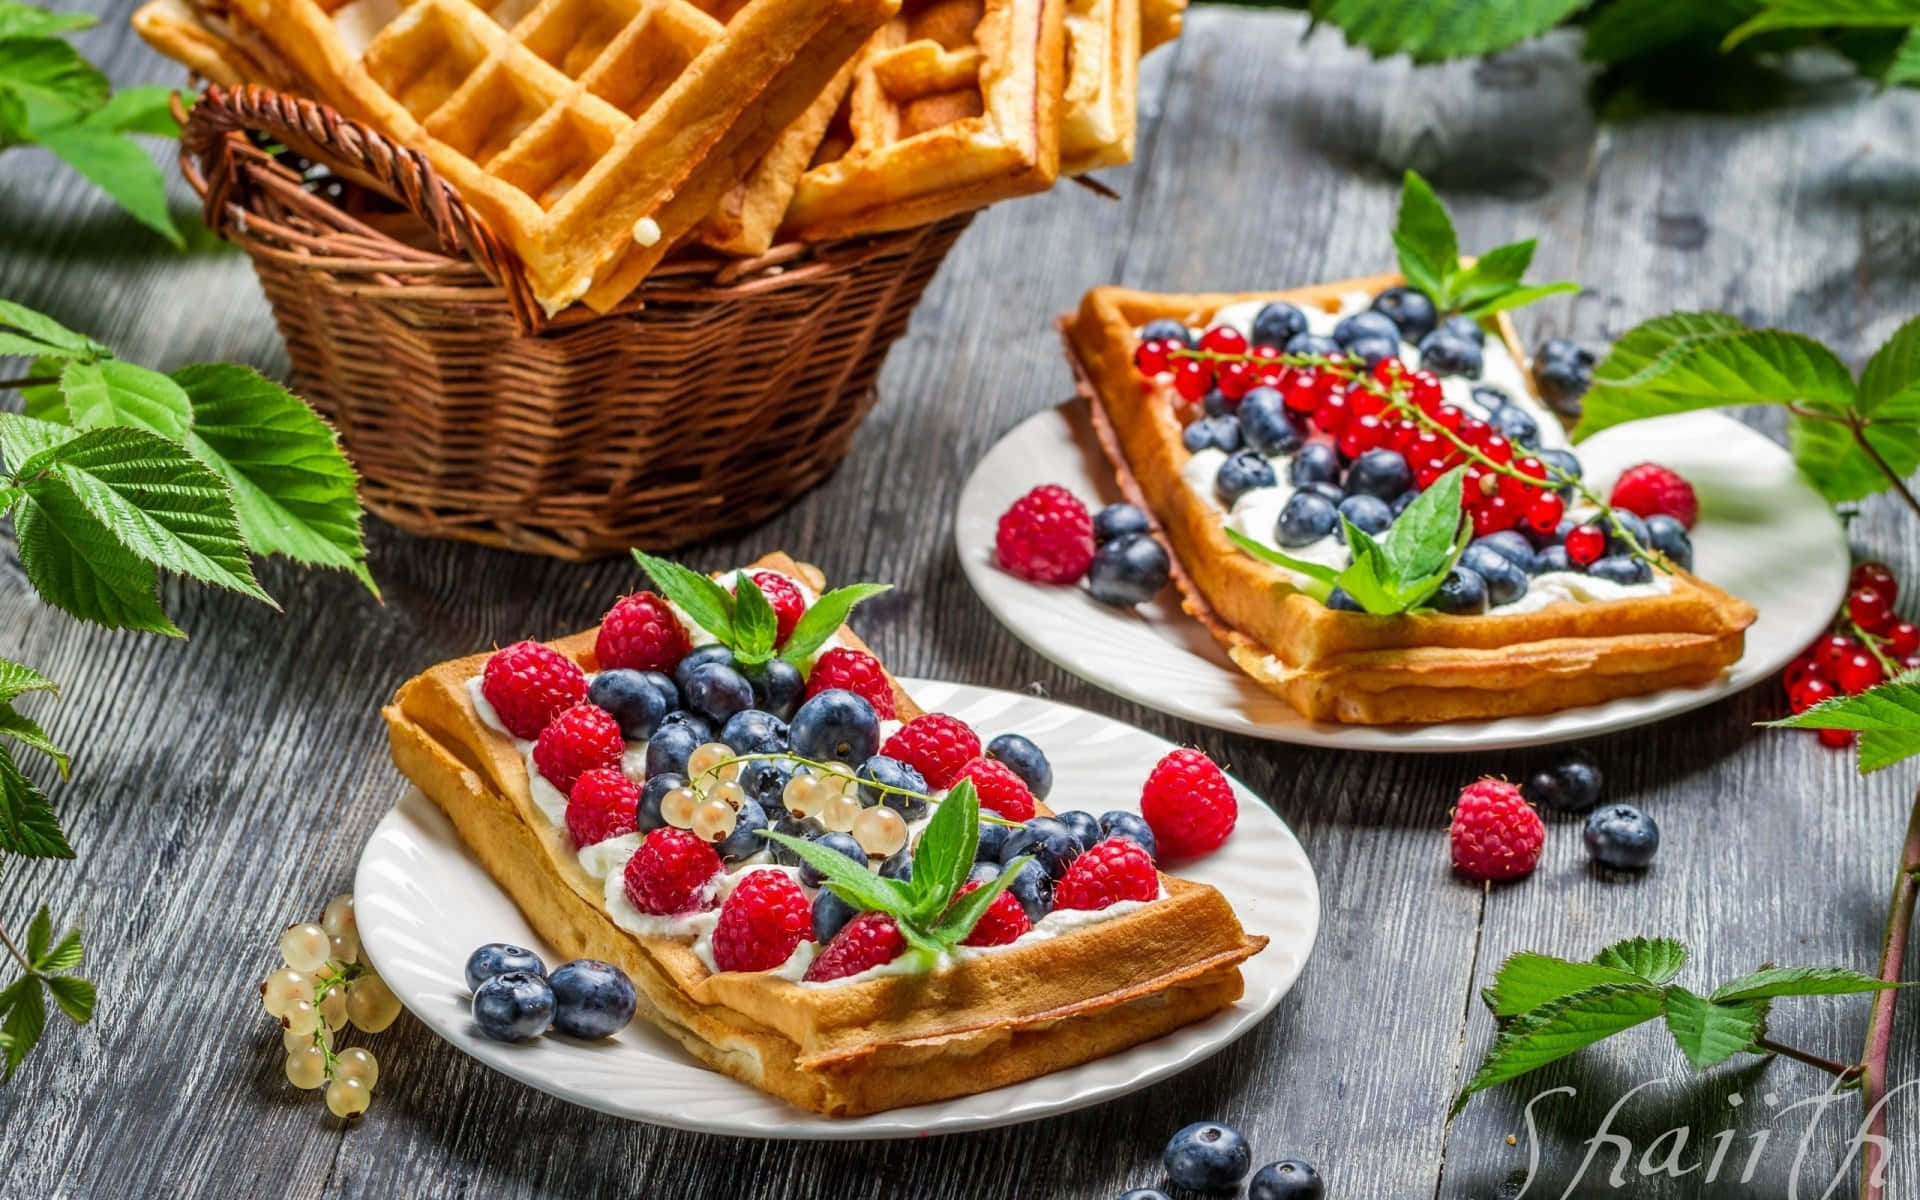 Delicious Golden Waffle on a Plate